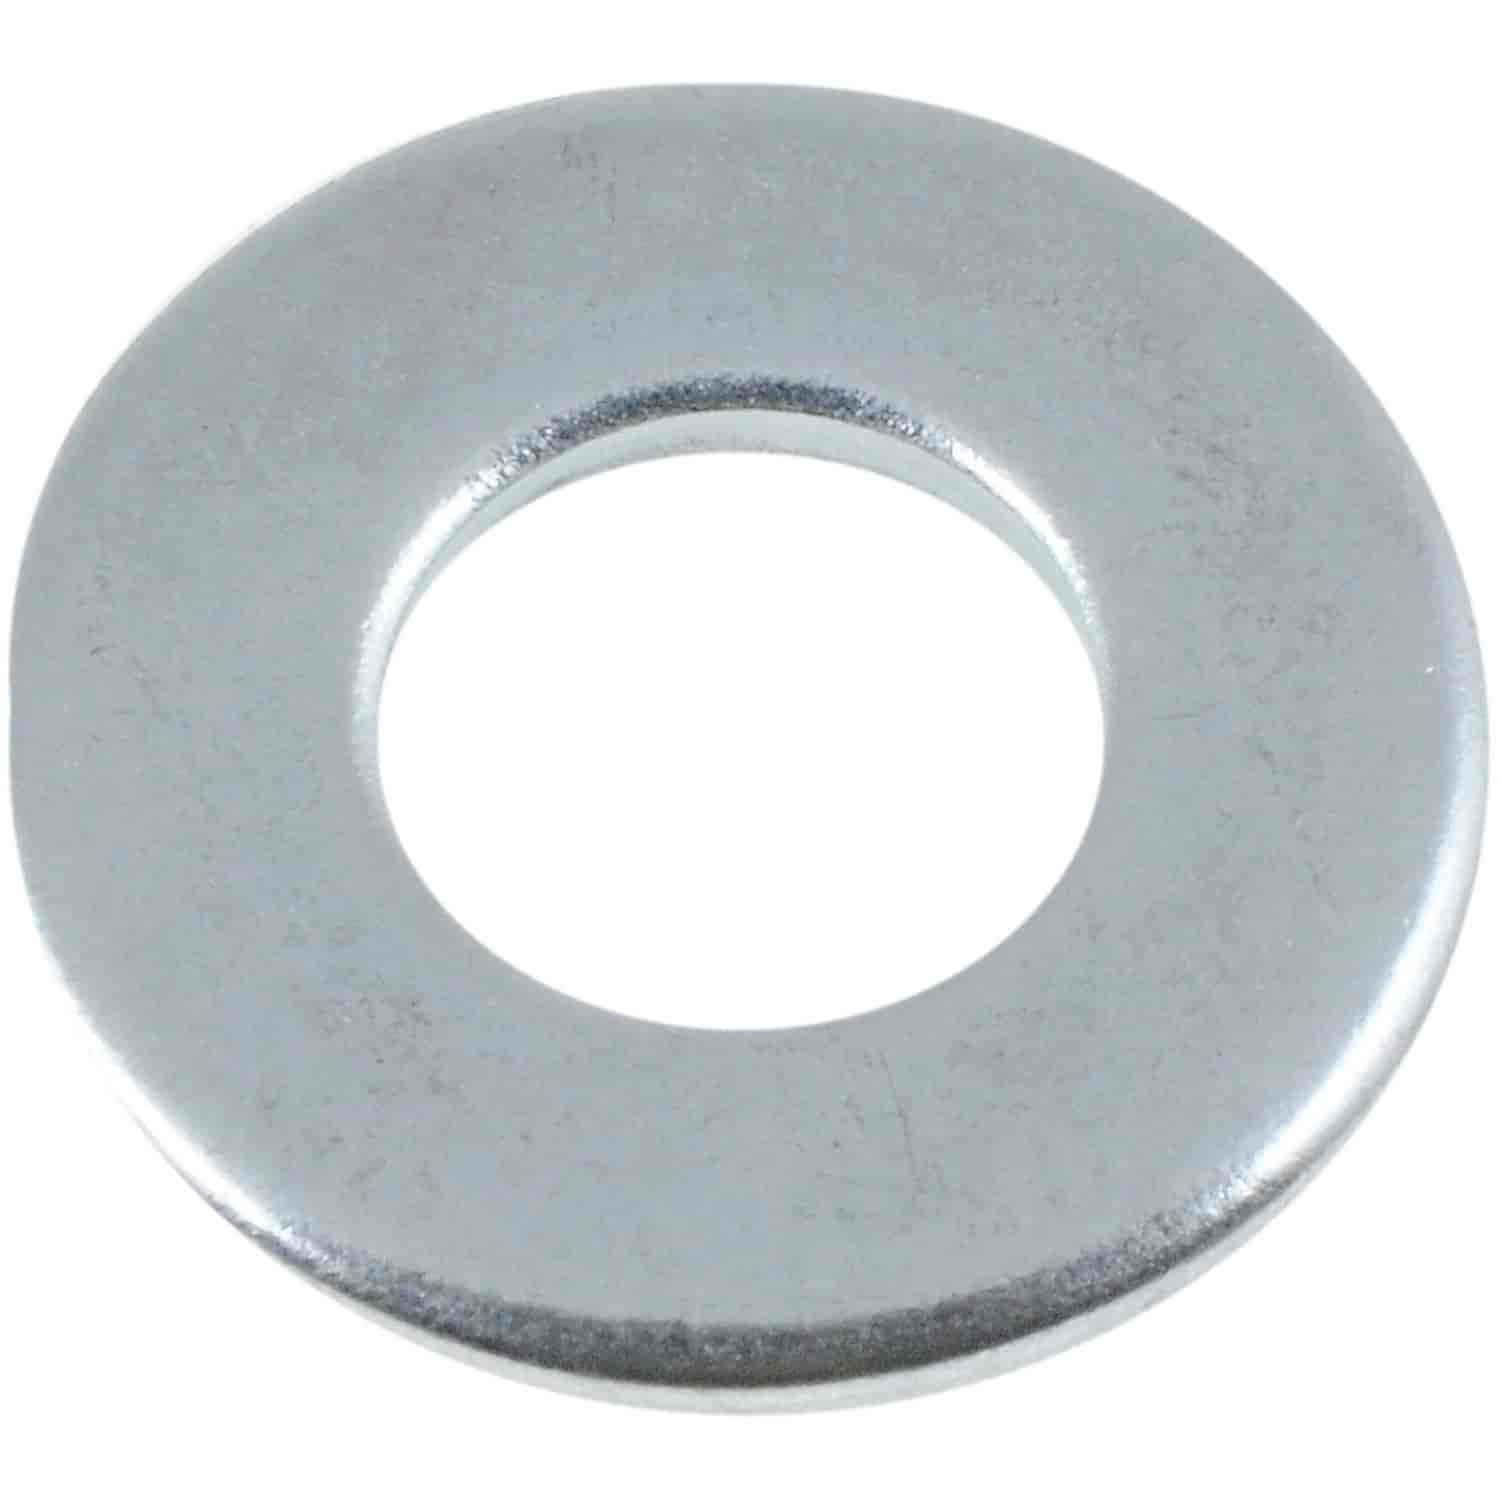 Flat Washer-Grade 5- 1/4 In.